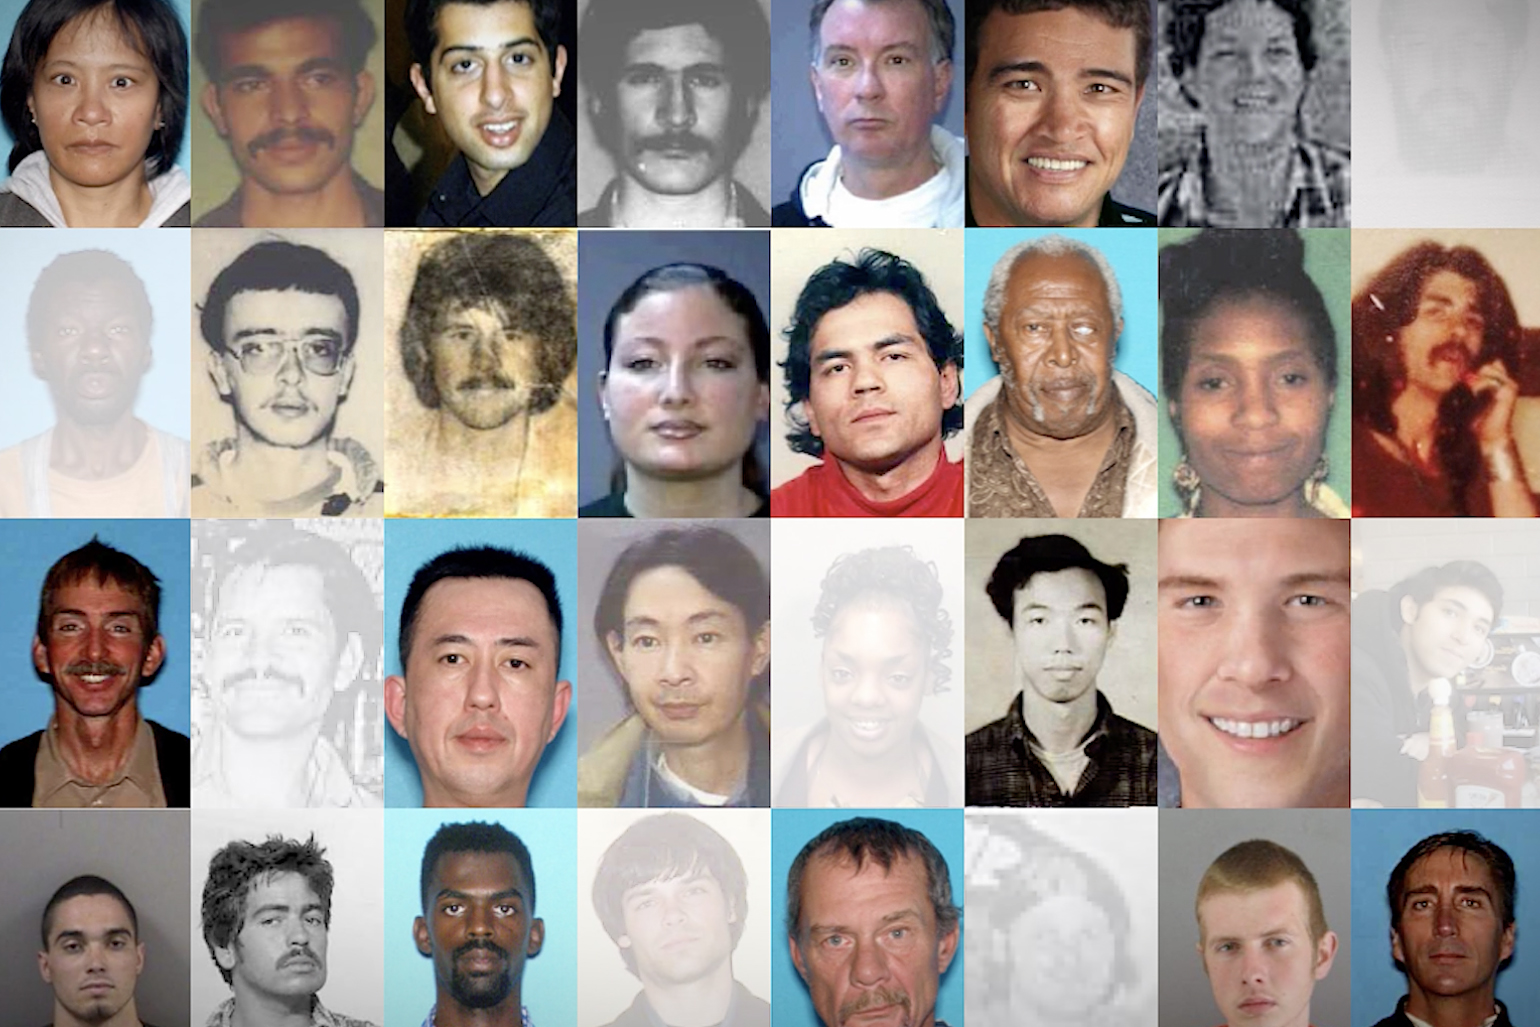 A collage of various individuals' portraits, diverse in age and ethnicity, possibly pertaining to a missing persons report or similar context.